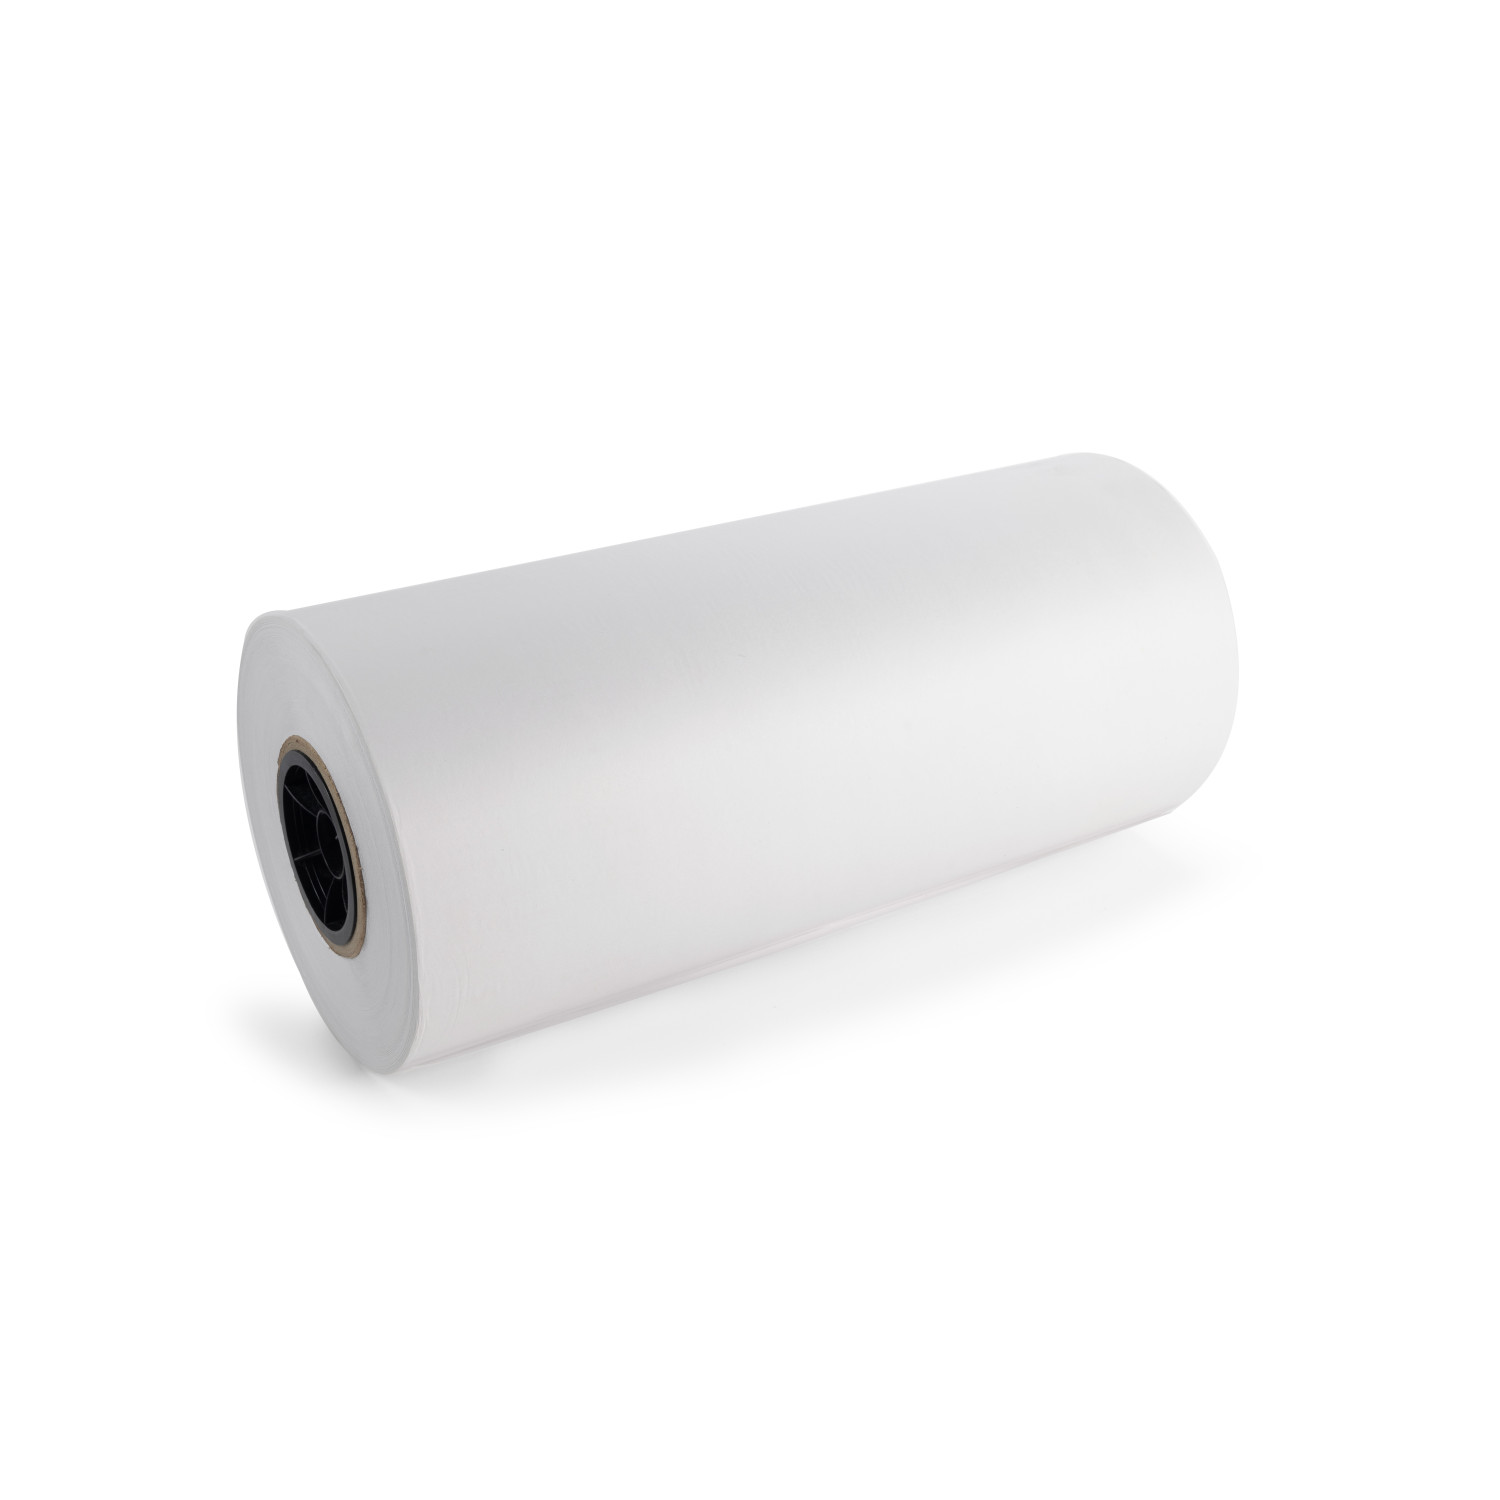 4mm Corrugated plastic sheets : 12 x 18 :10 Pack 100% Virgin White